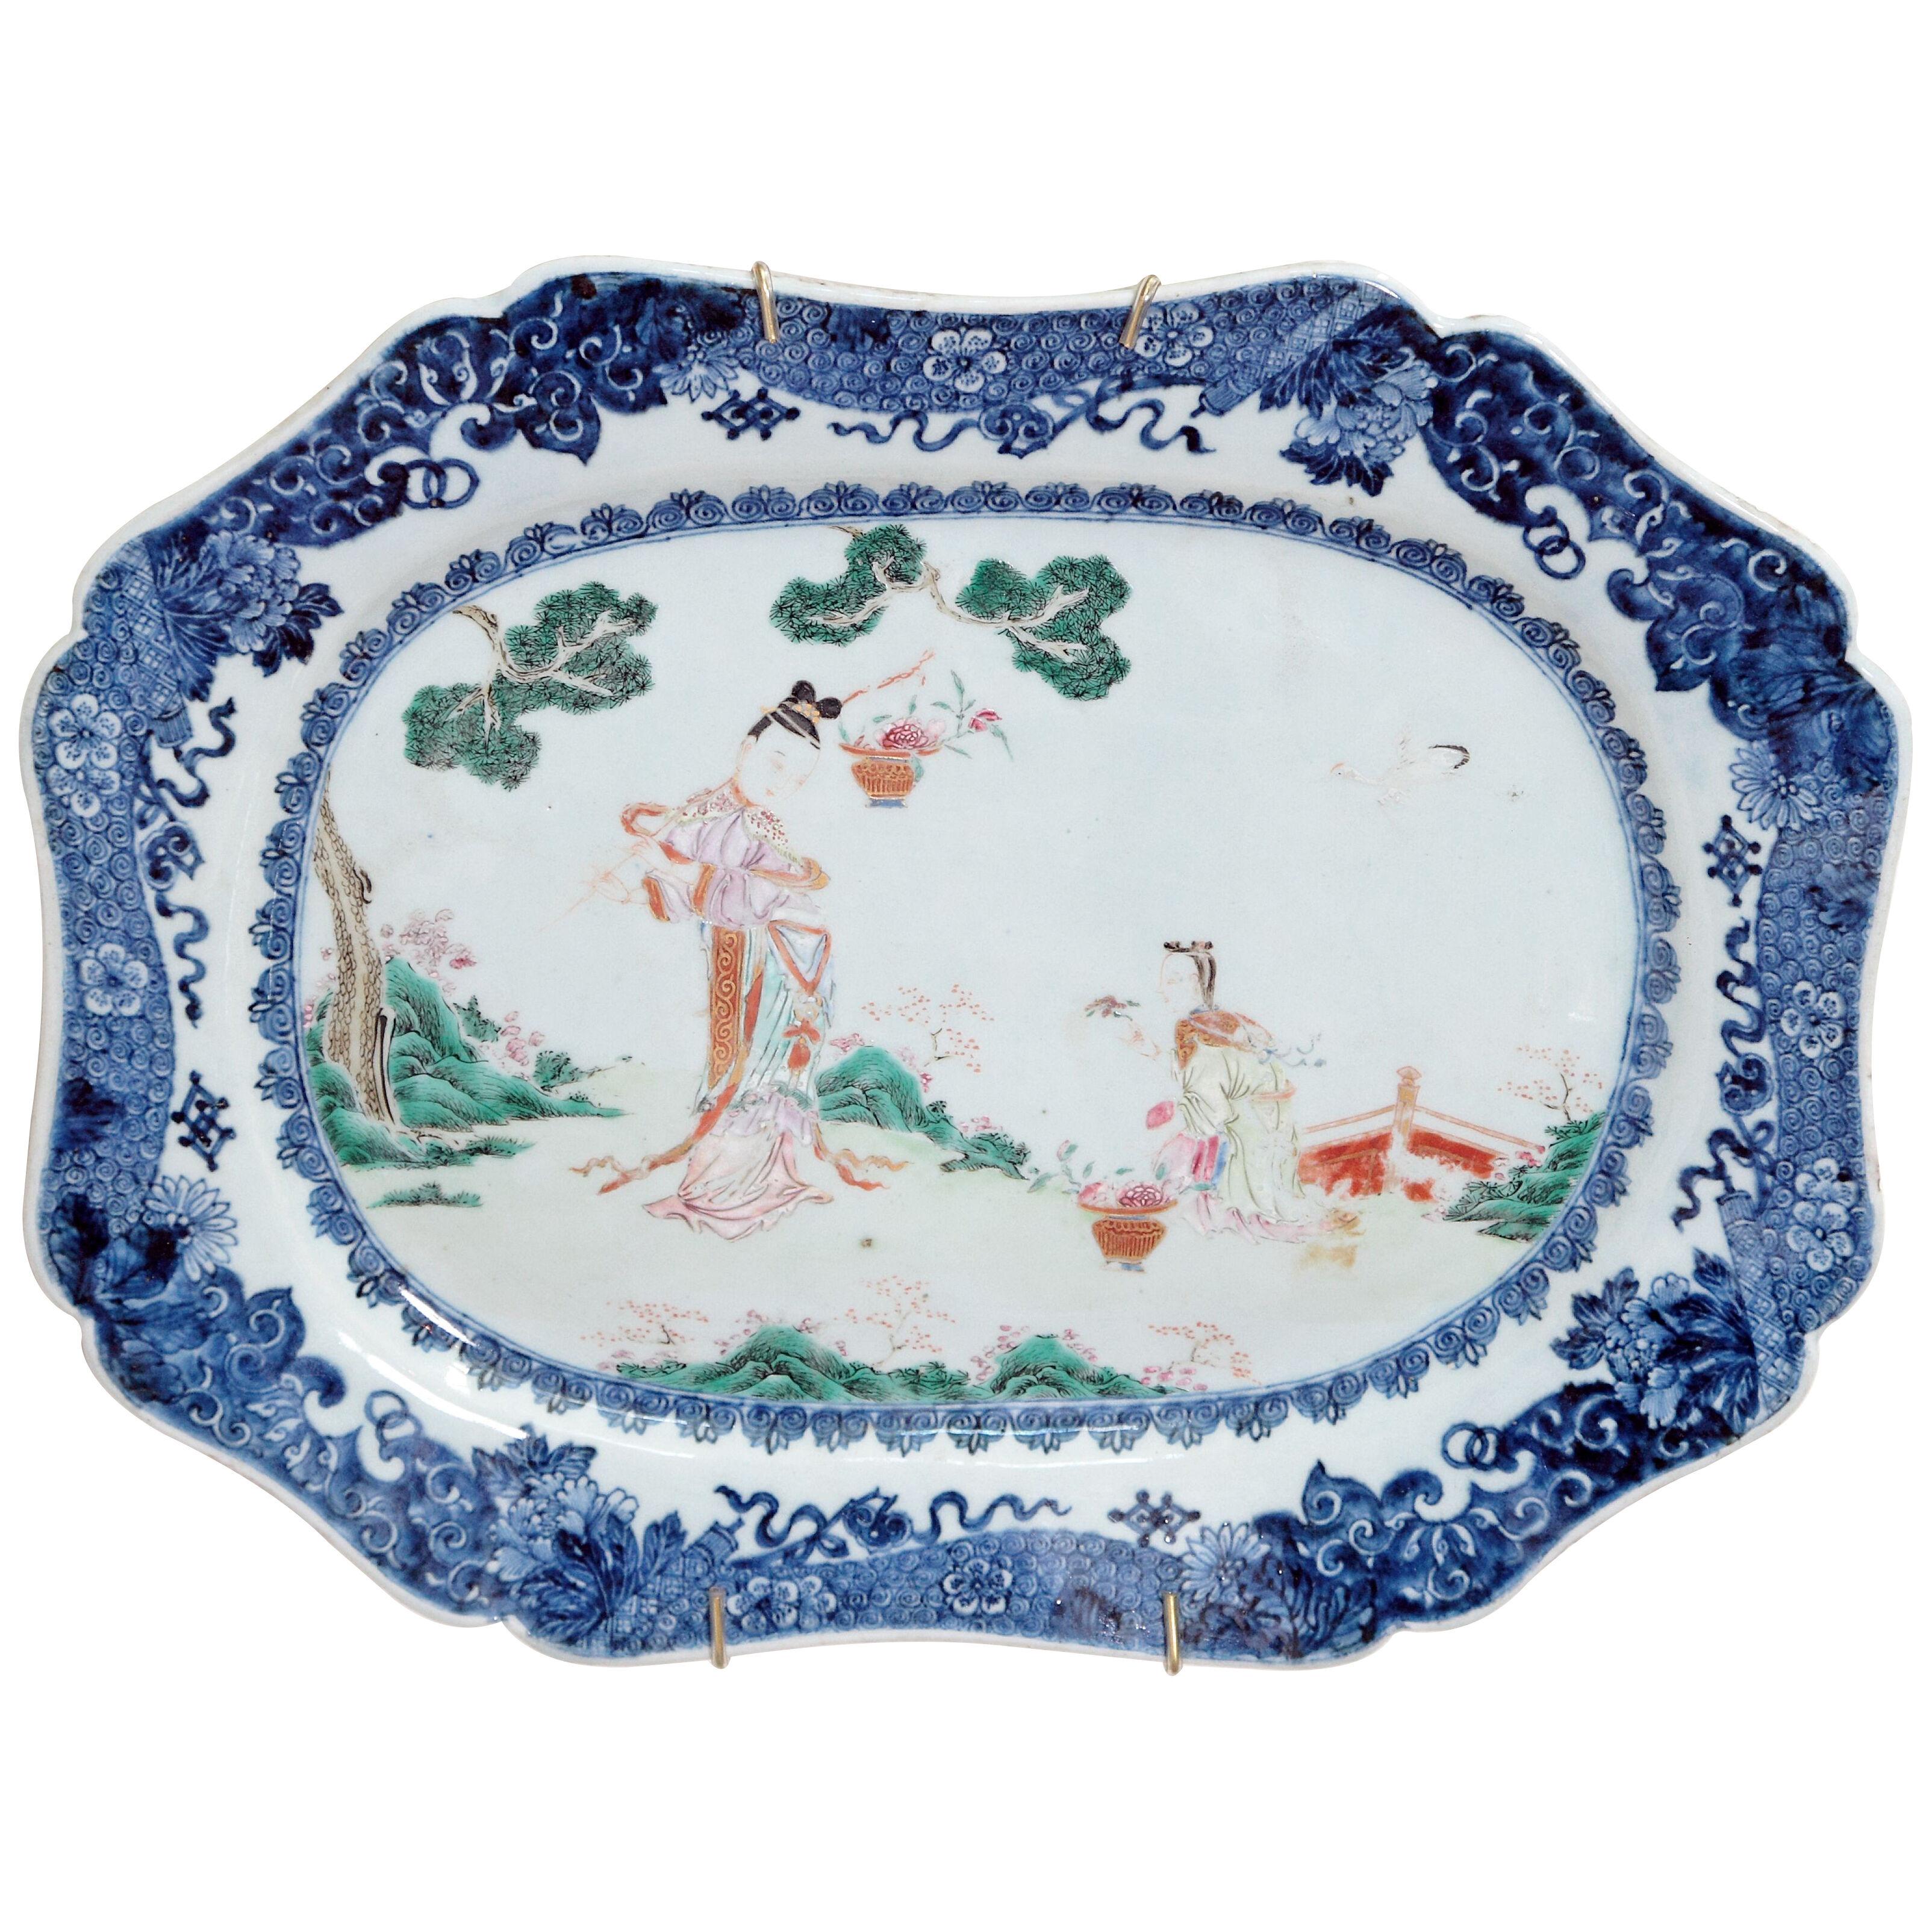 A Large 18th Century Chinese Blue and White Porcelain Platter